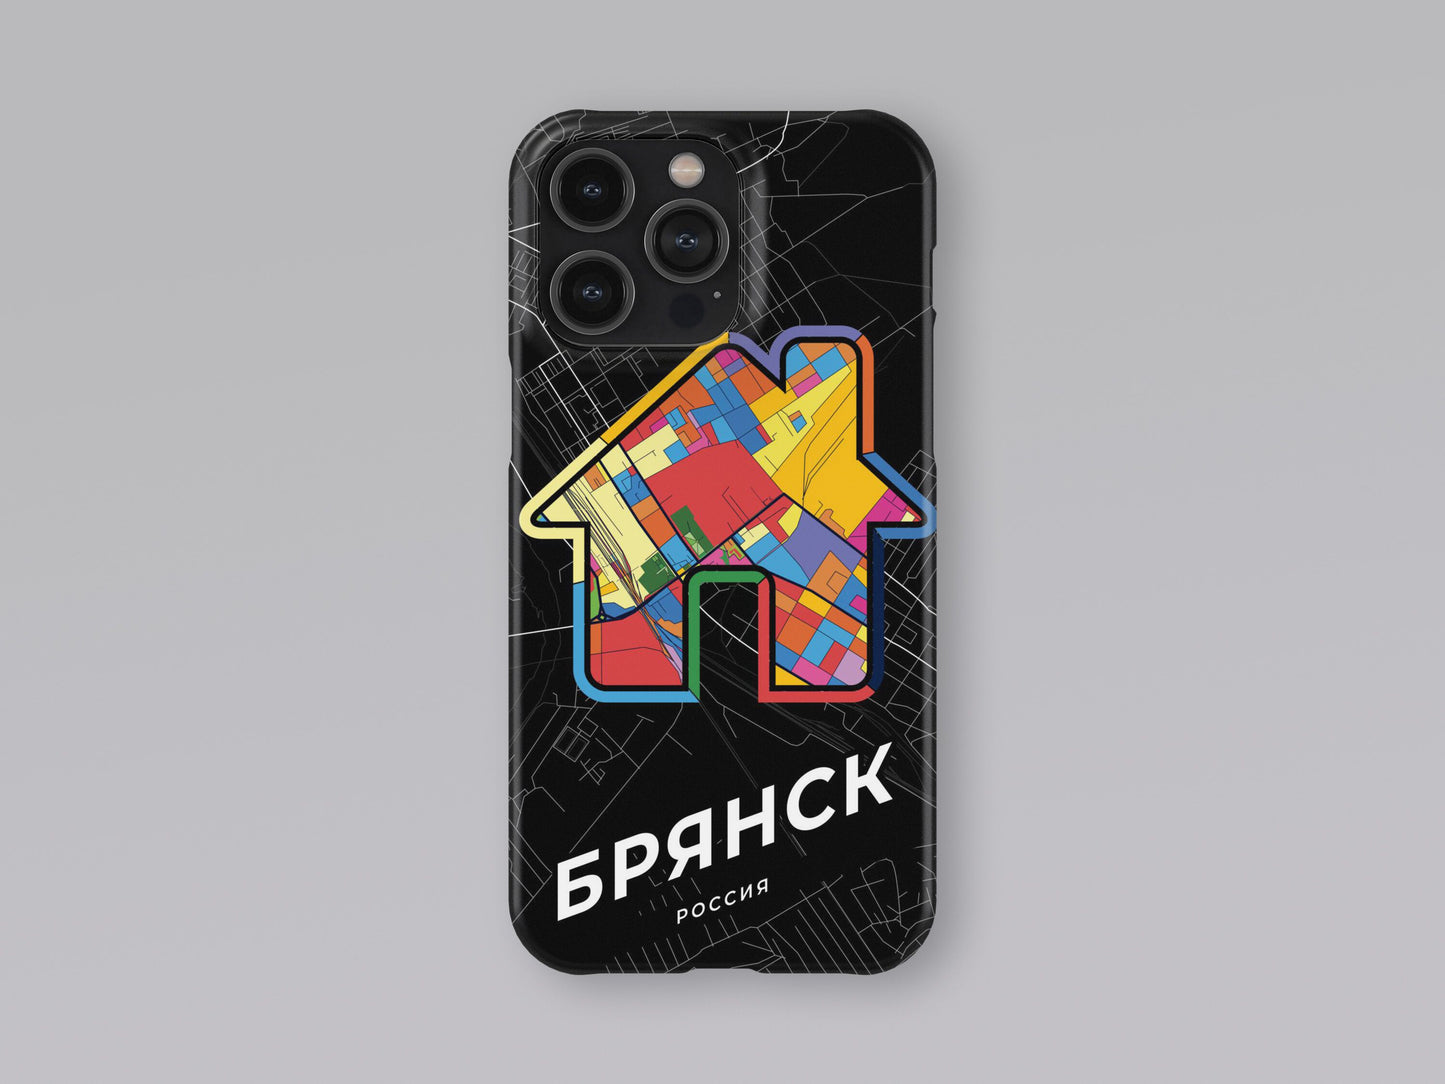 Bryansk Russia slim phone case with colorful icon. Birthday, wedding or housewarming gift. Couple match cases. 3